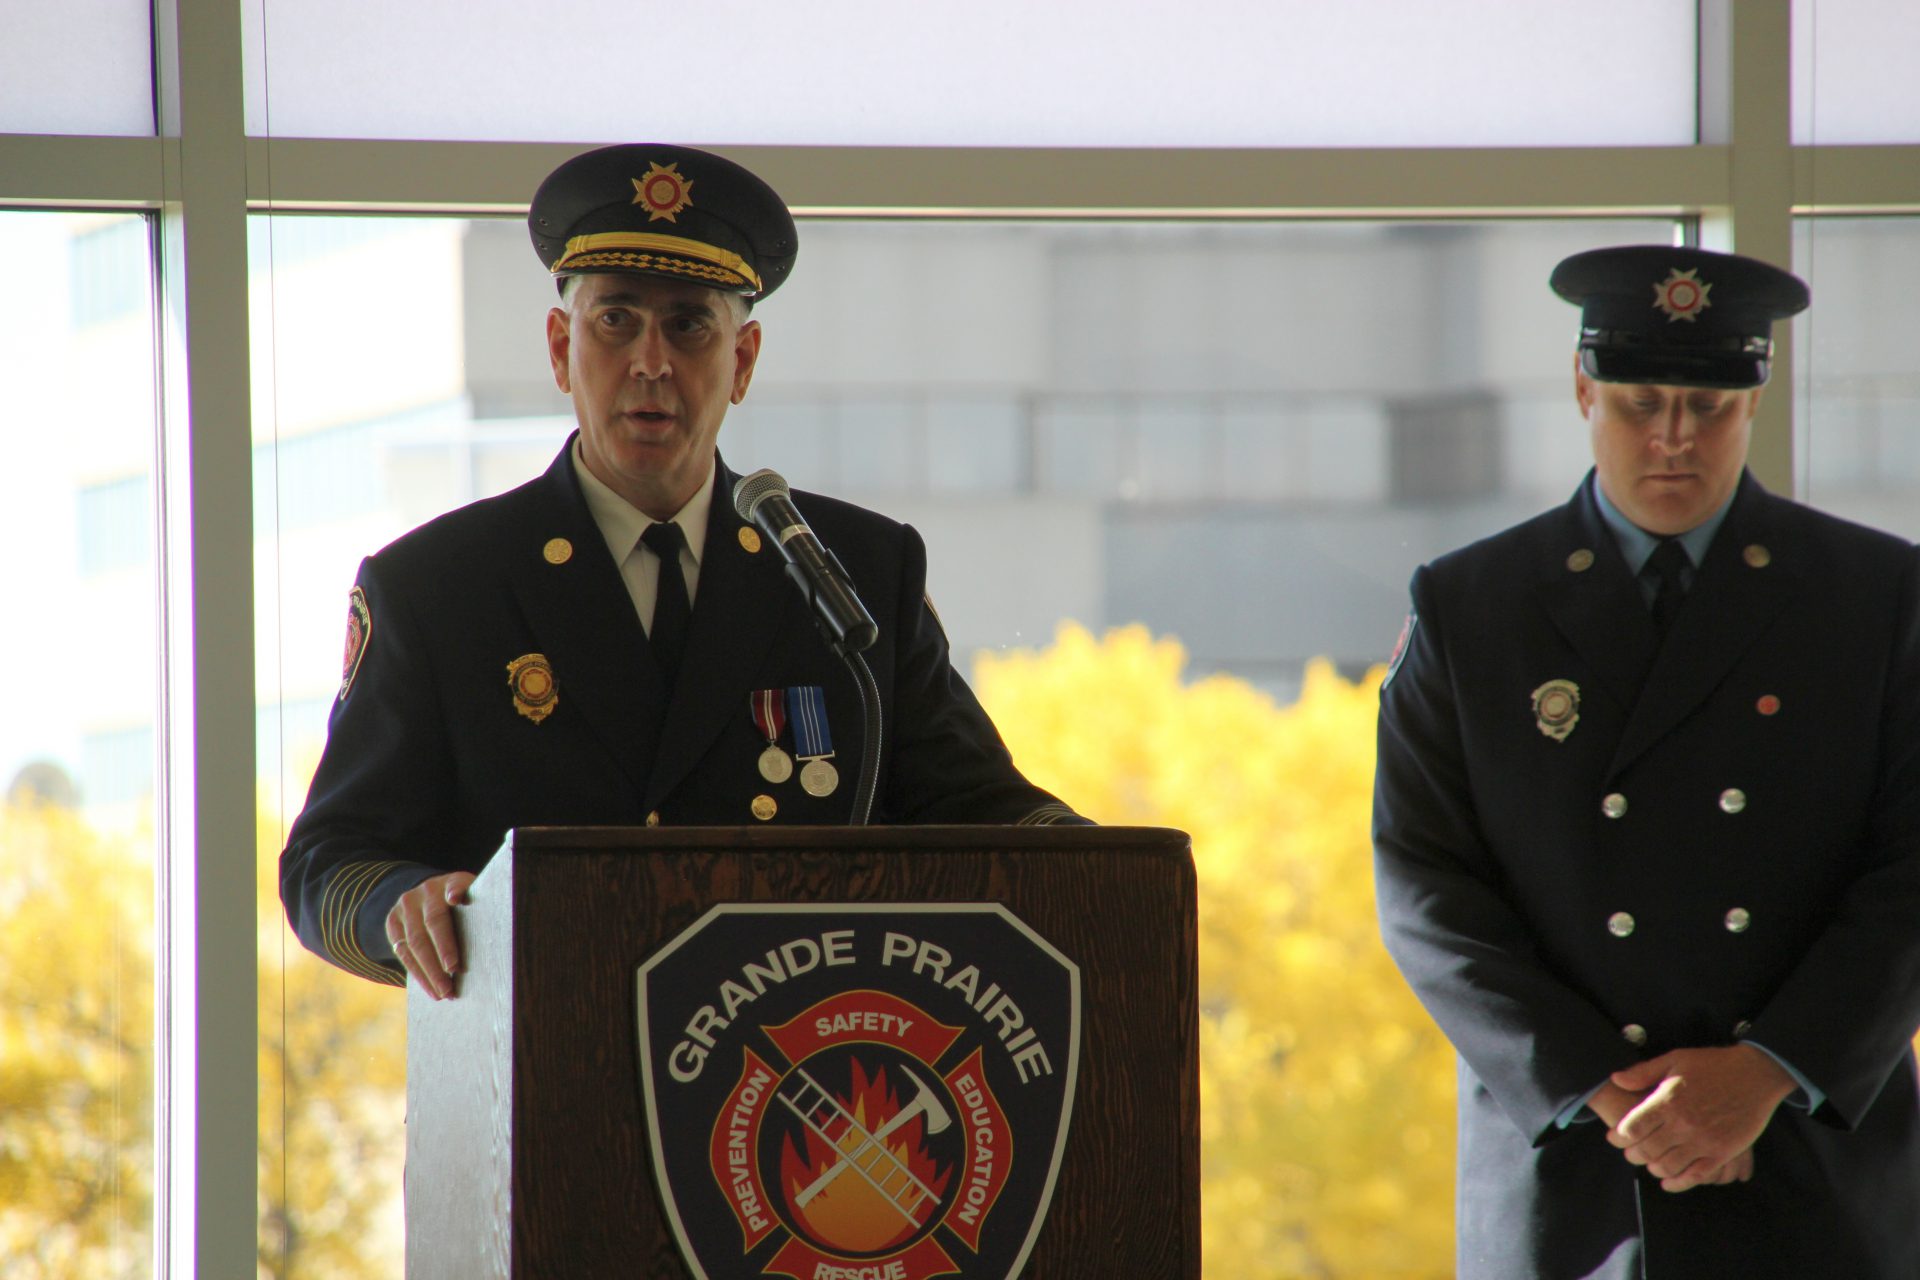 Firefighters pay tribute to fallen comrades